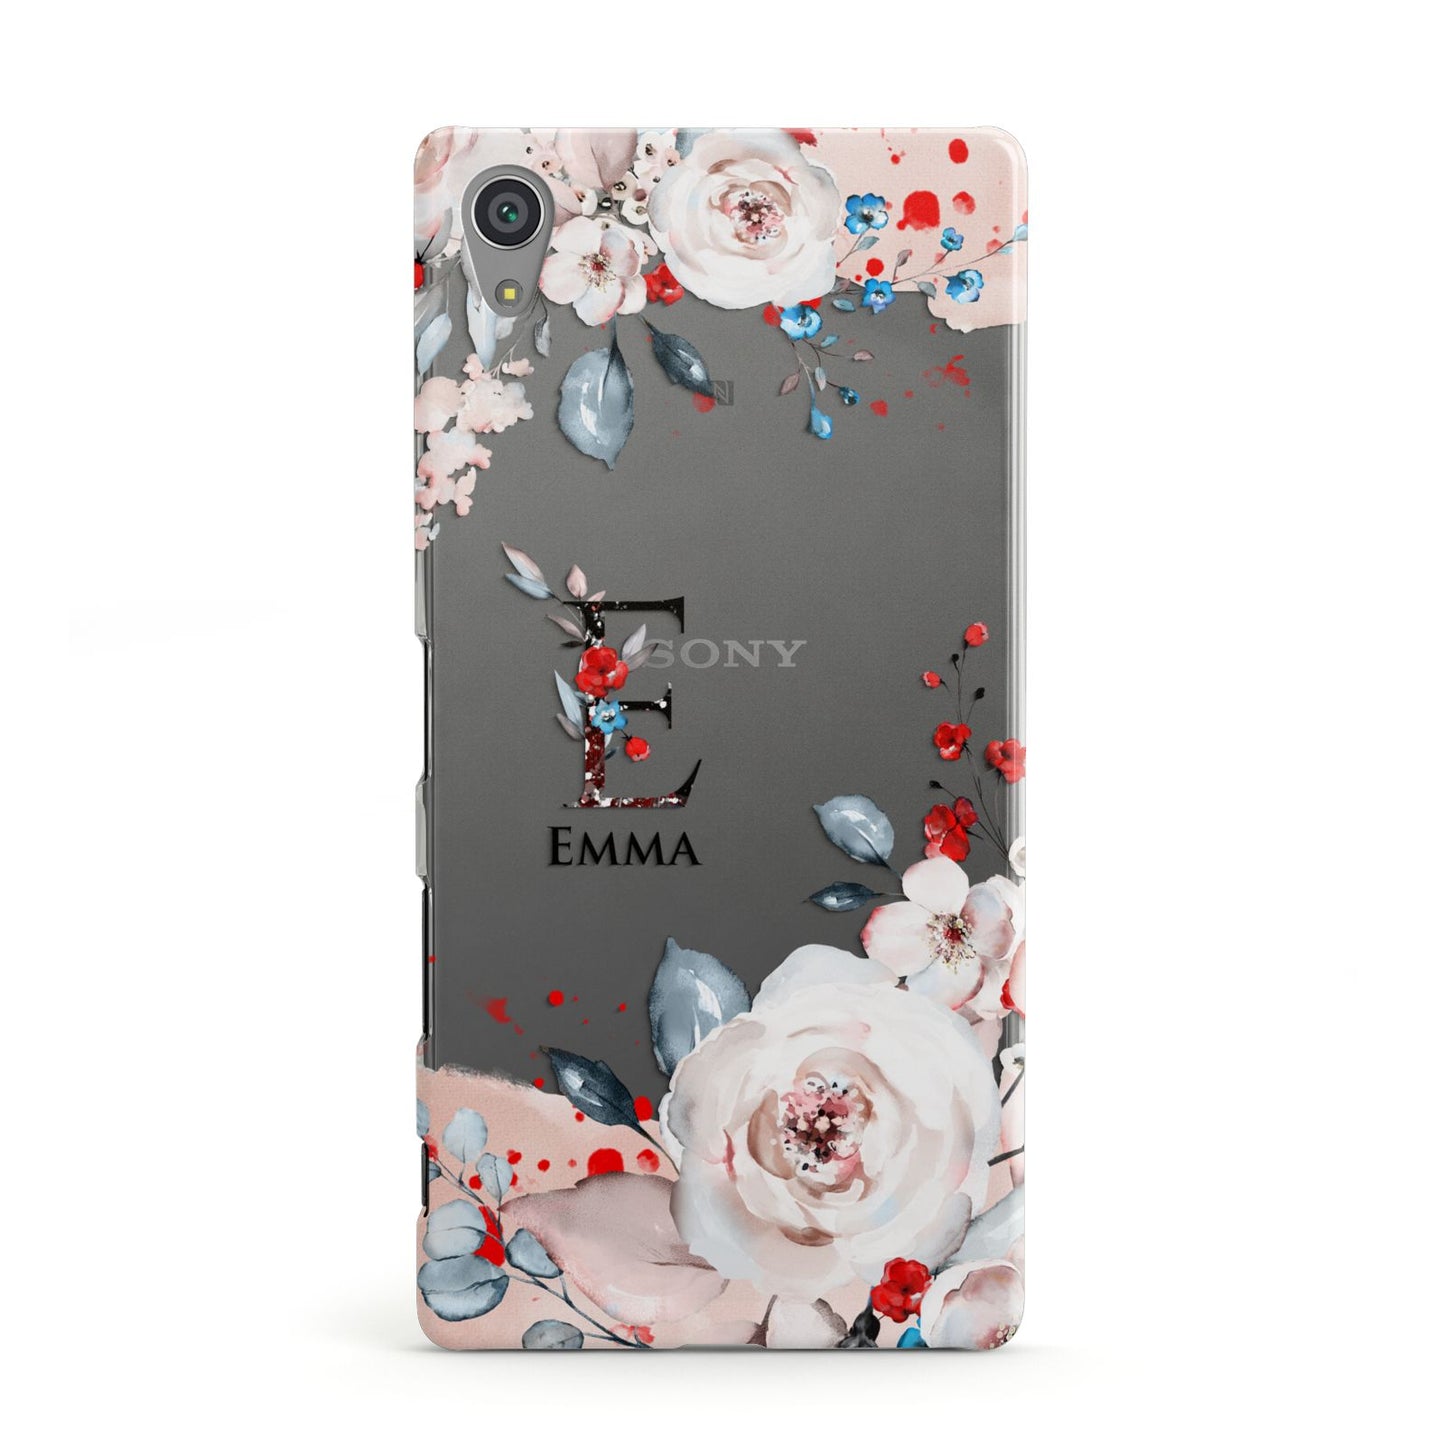 Monogrammed Roses Floral Wreath Sony Xperia Case